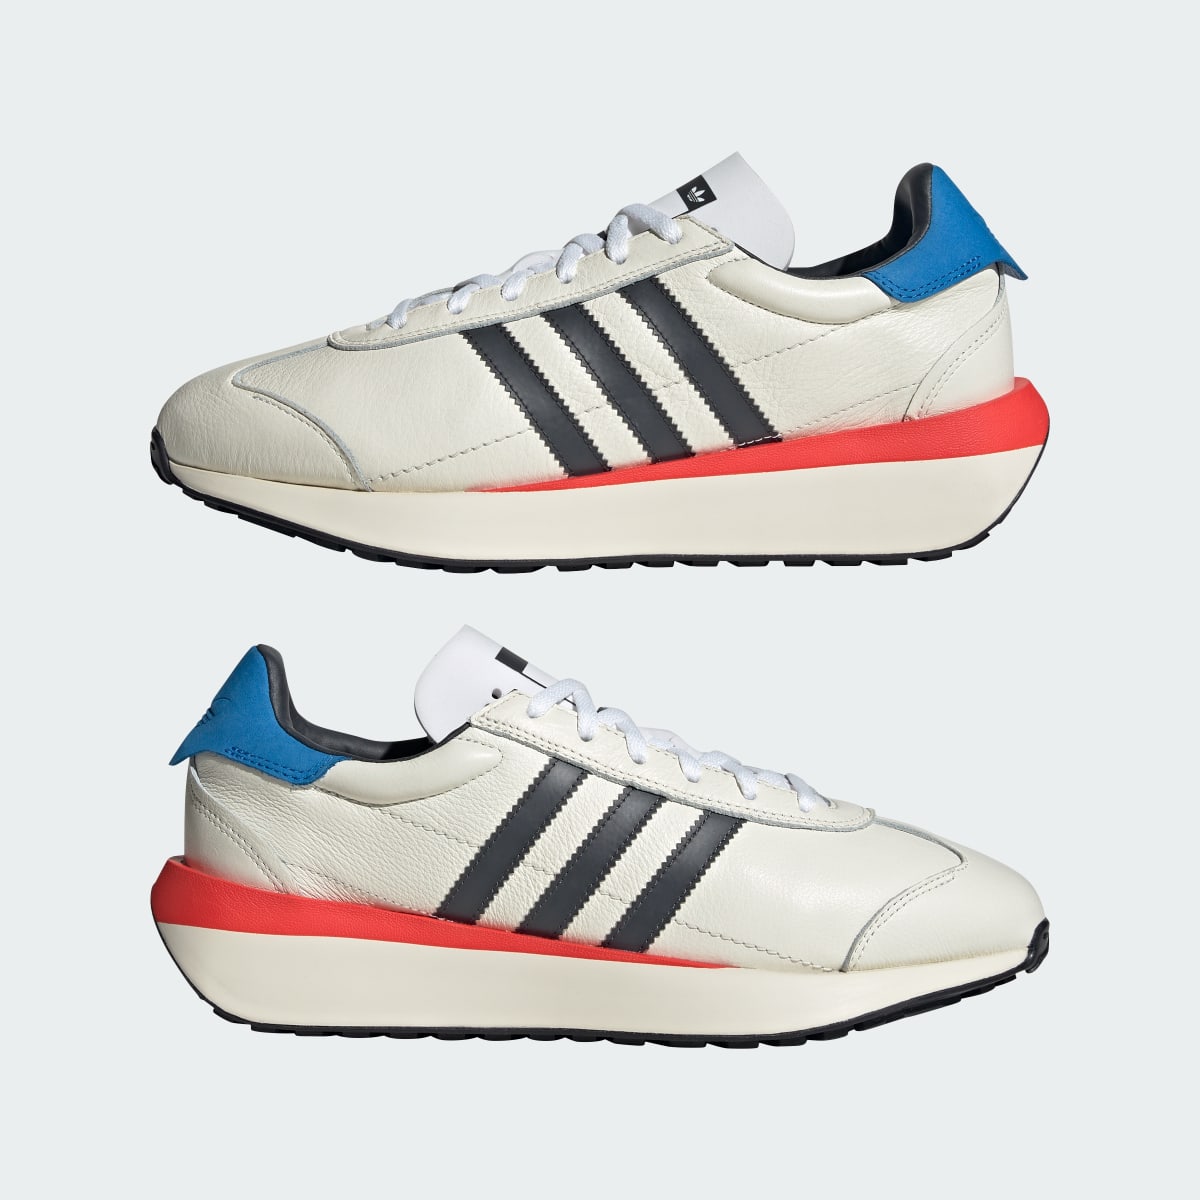 Adidas Country XLG Schuh. 11